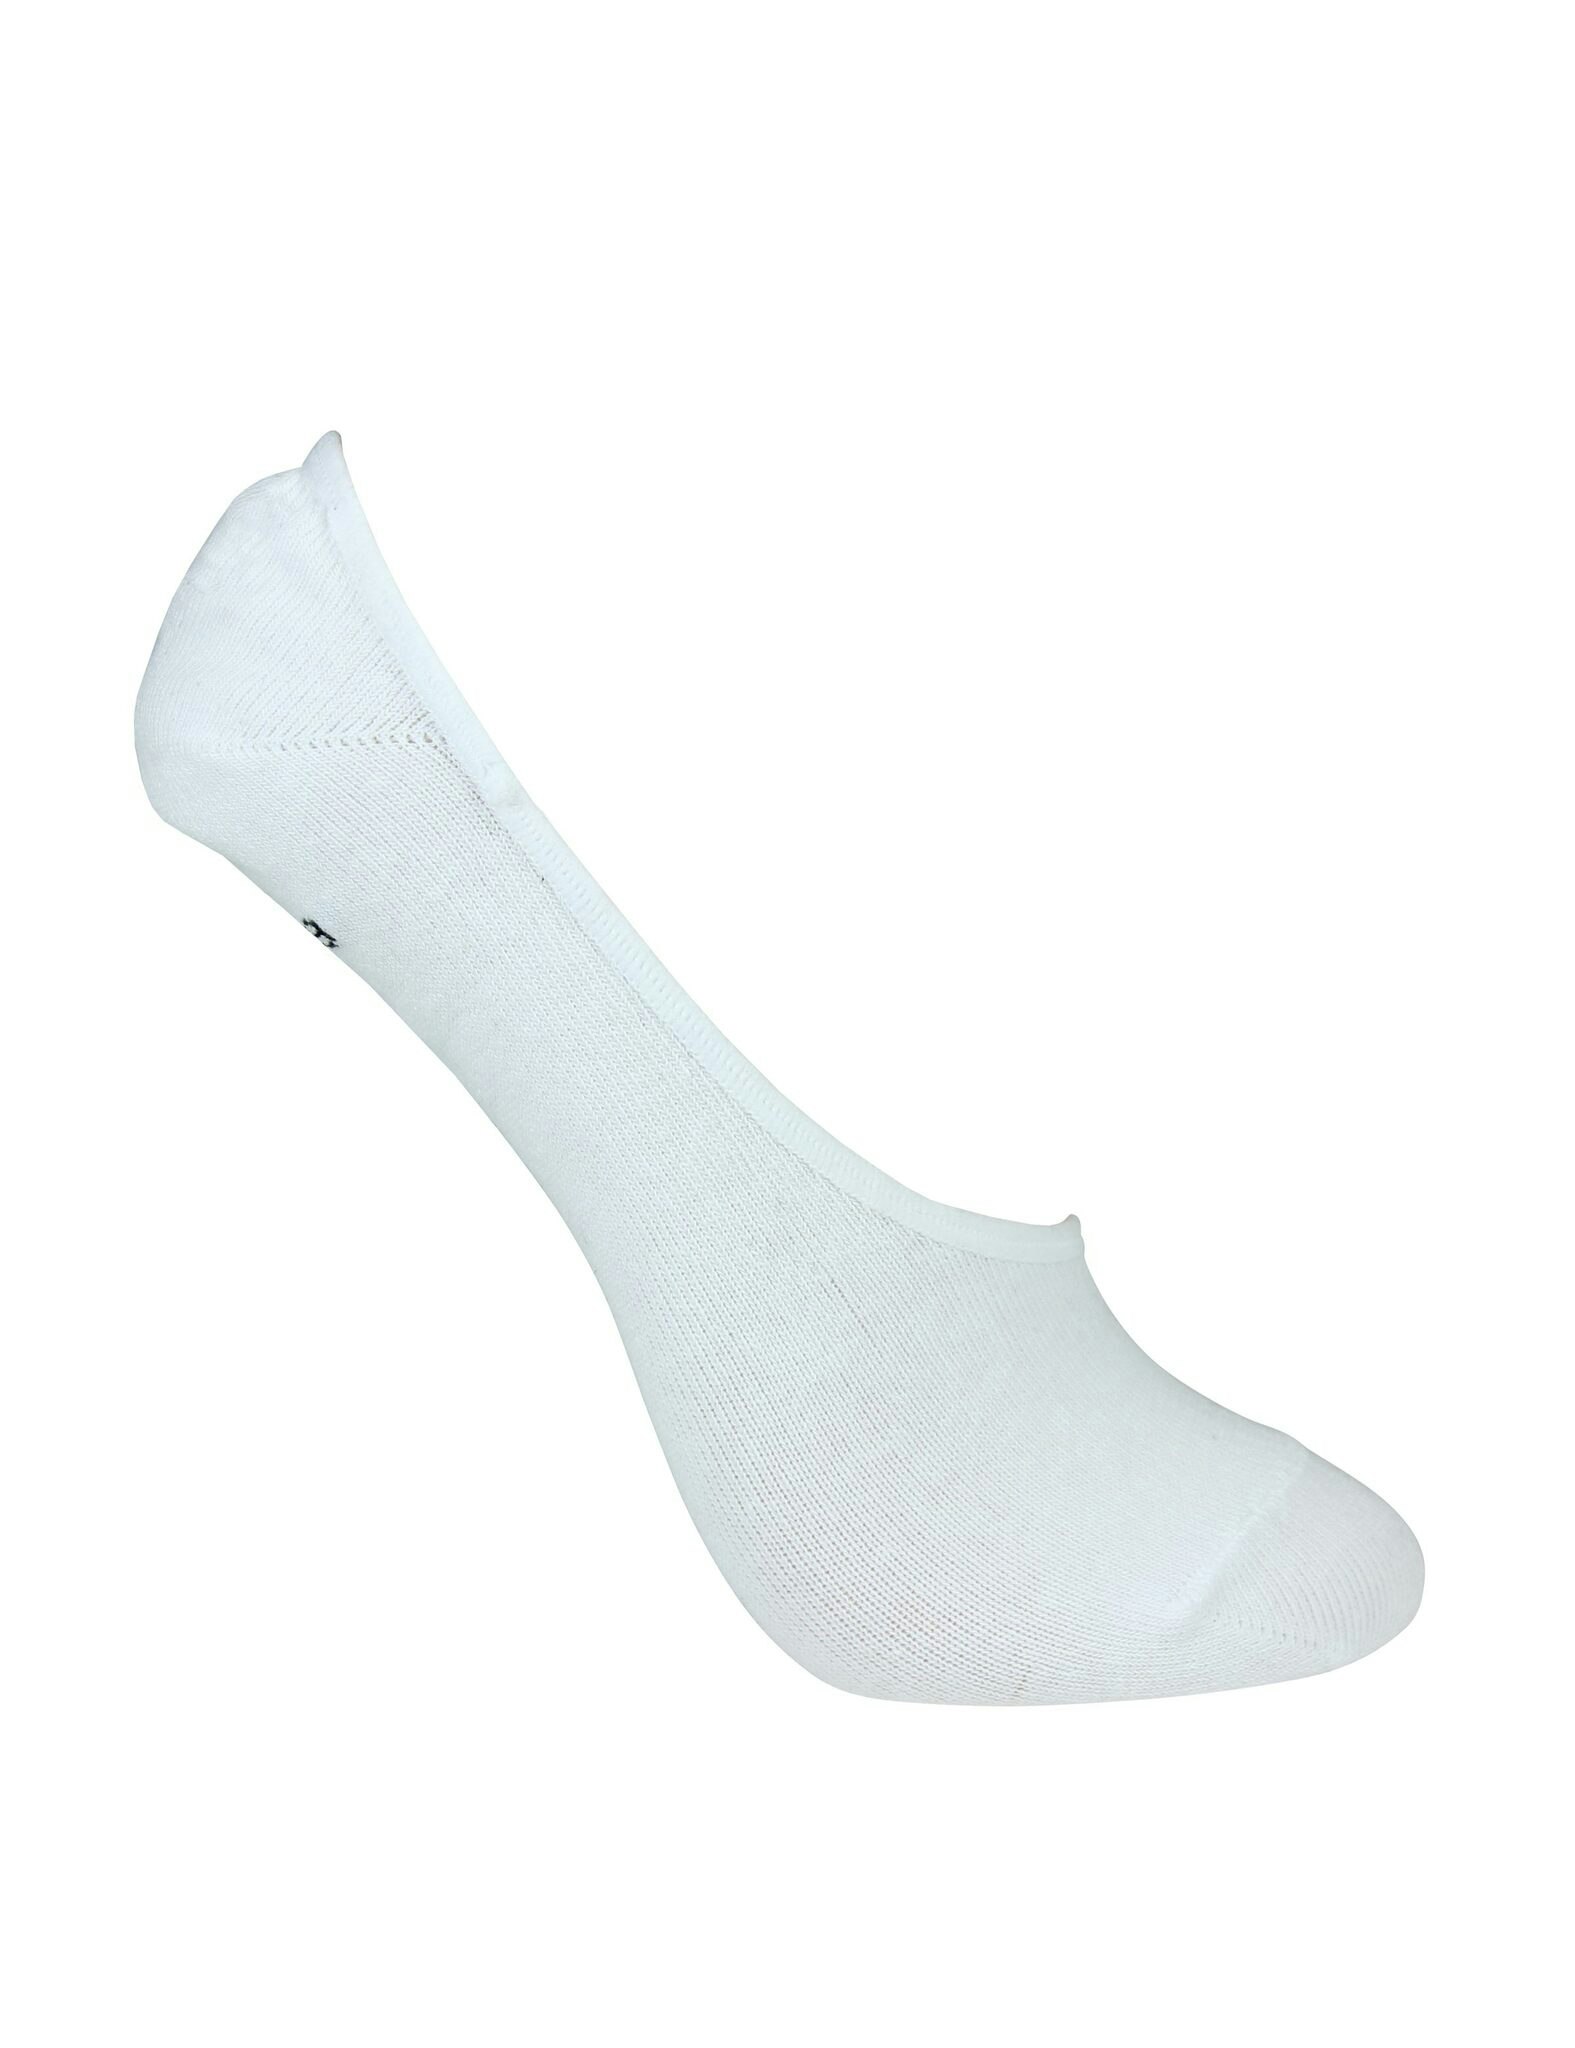 Socks invisible bamboo with silicone